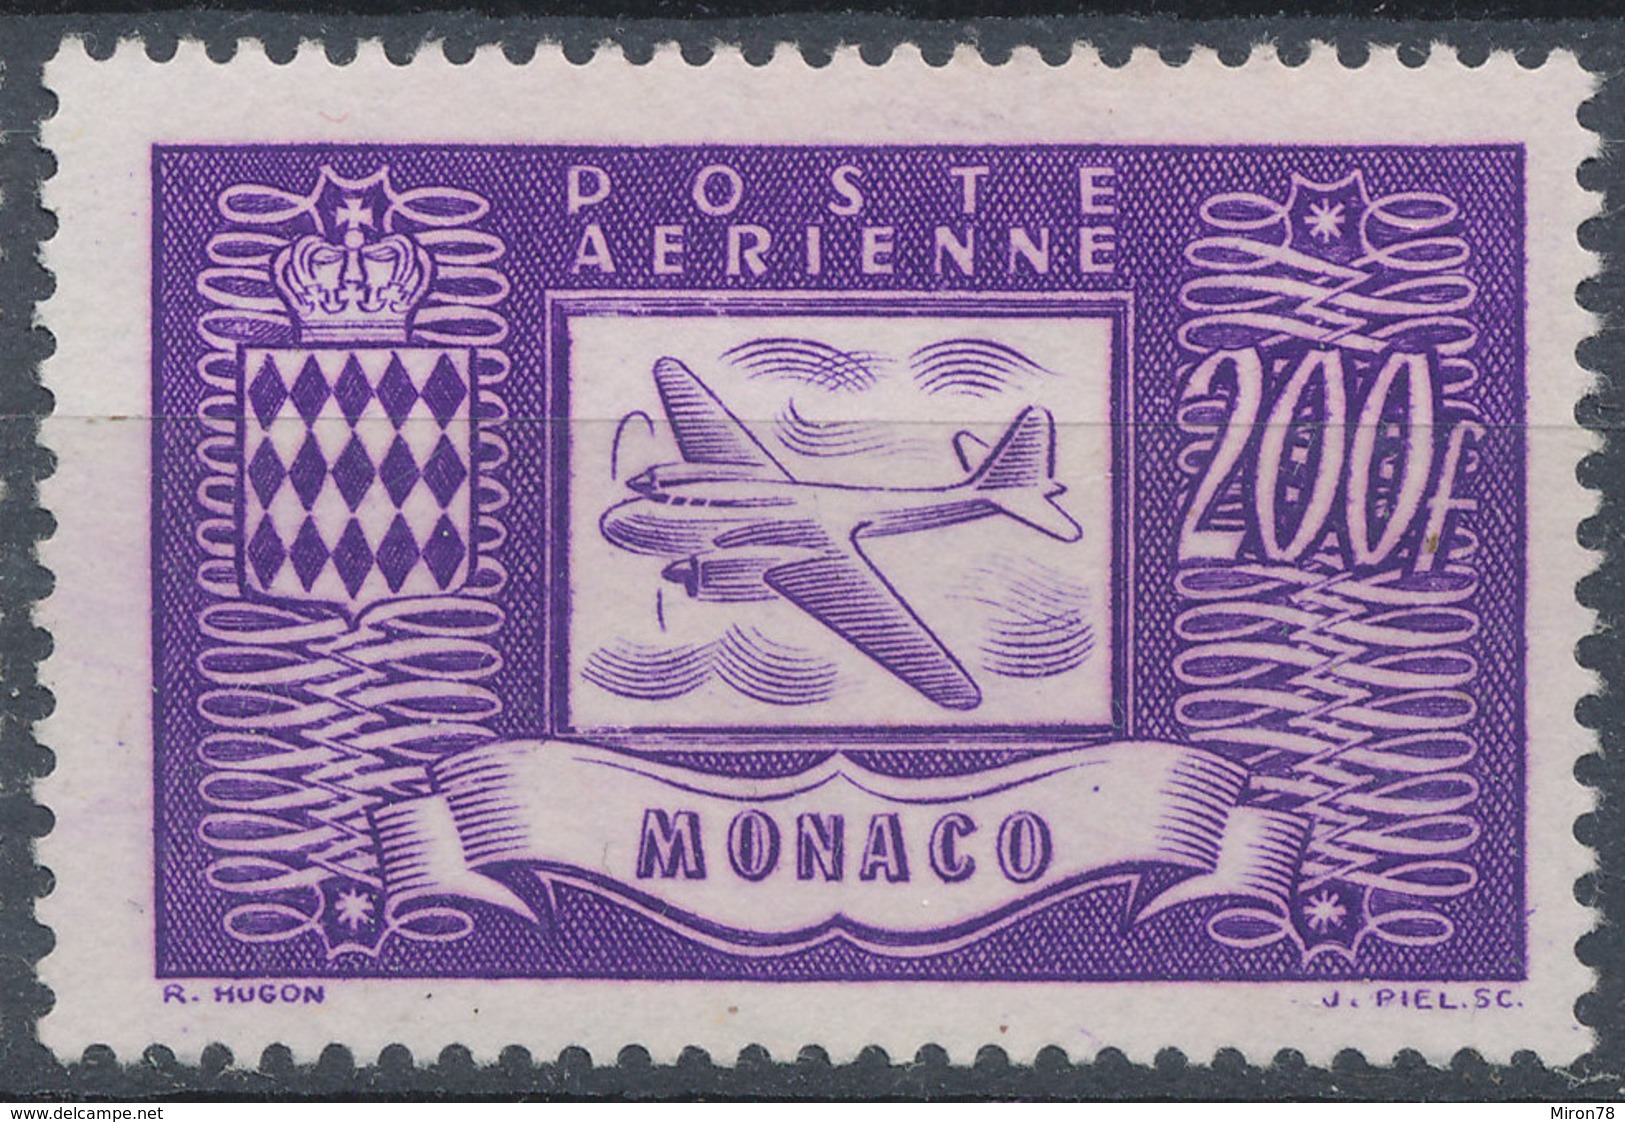 Stamp Monako Airmail 1946 200fr MNG - Poste Aérienne